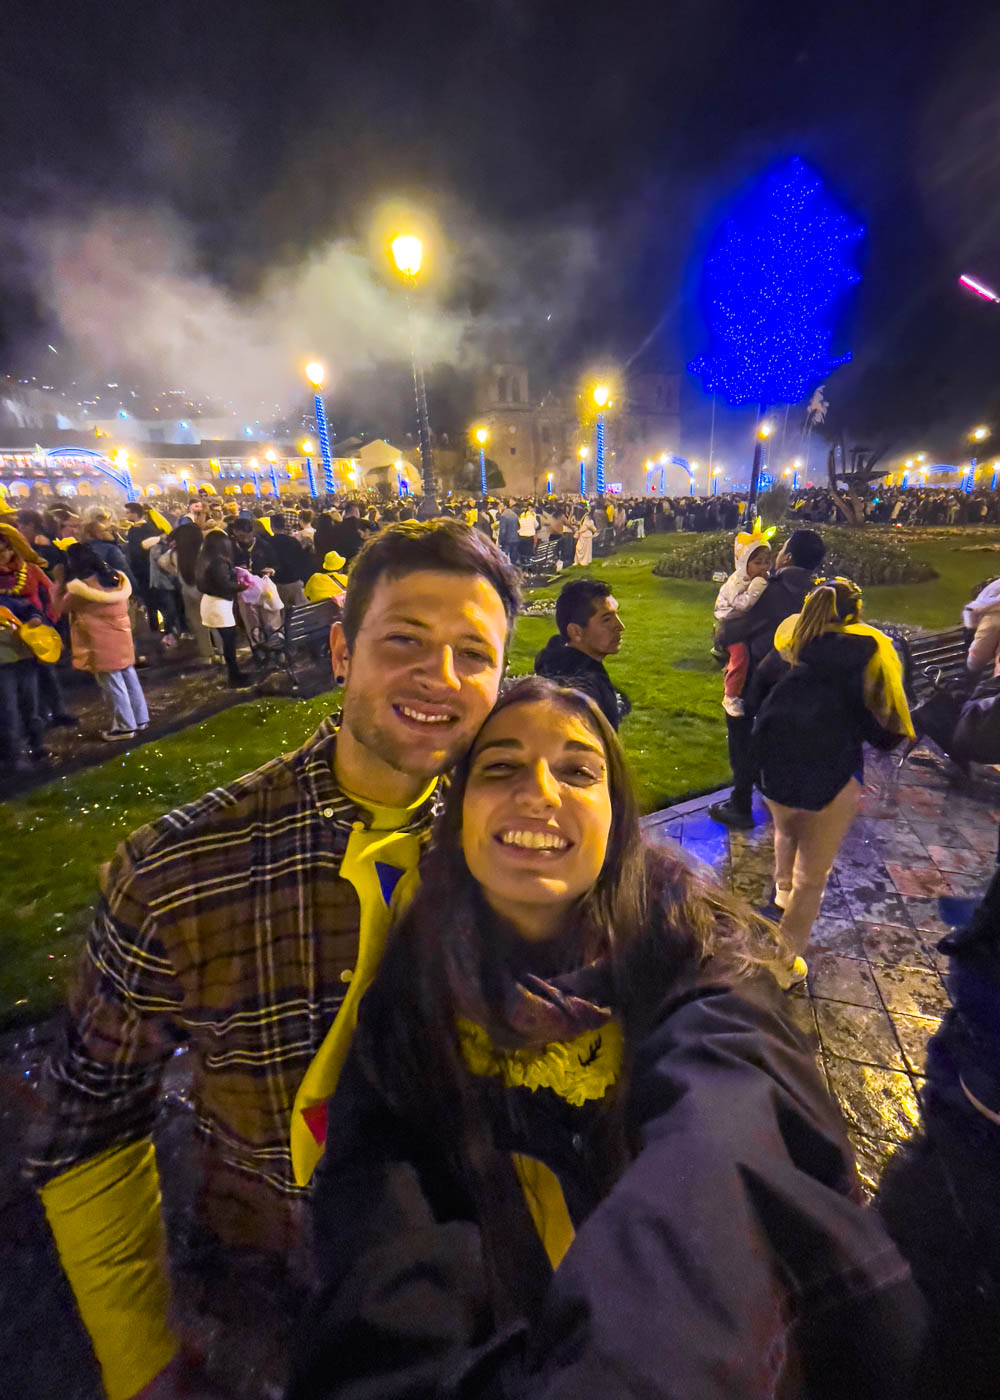 Ryan and Sara taking a selfie in front of crowds at Plaza de Armas while wearing yellow on New Year's Eve in Cusco.